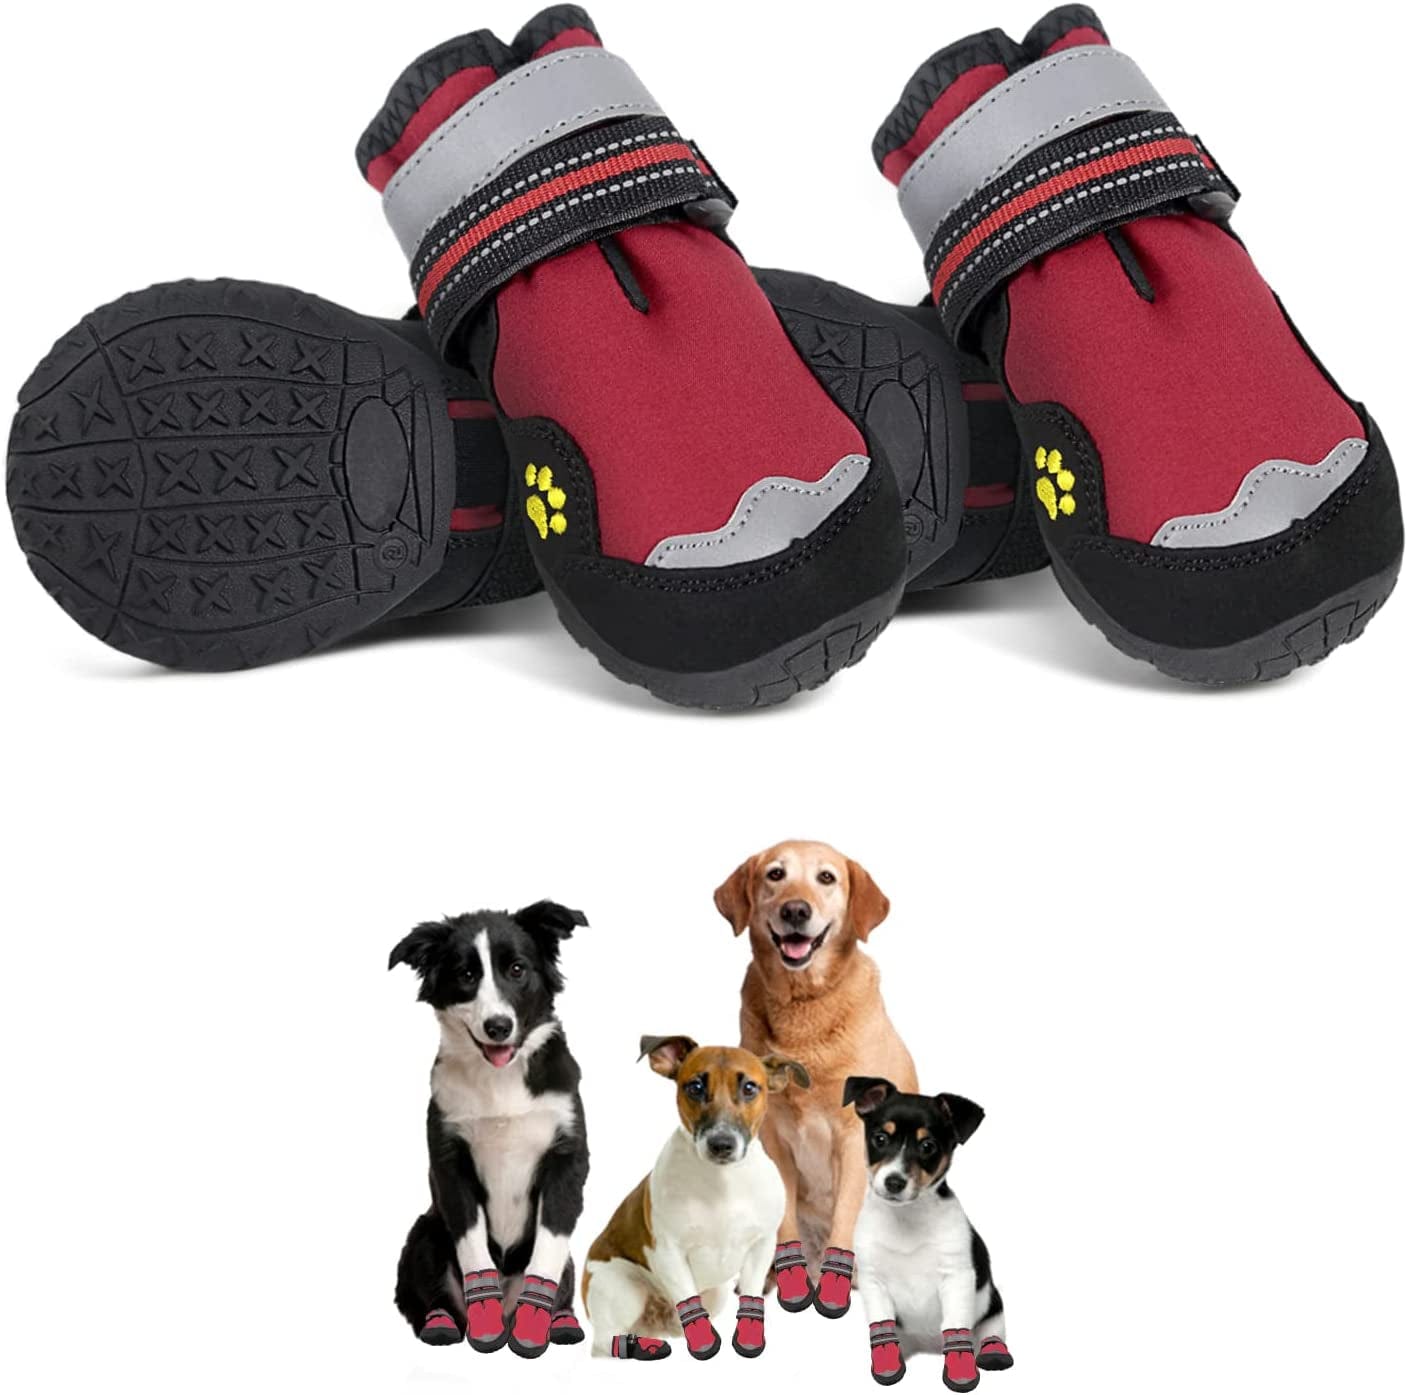 Dog Boots for Large Dogs, BOWITE Waterproof and Non-Slip Dog Shoes with Reflective Strips, Dog Booties Outdoor Paw Protector 4Pcs/Set, Orange